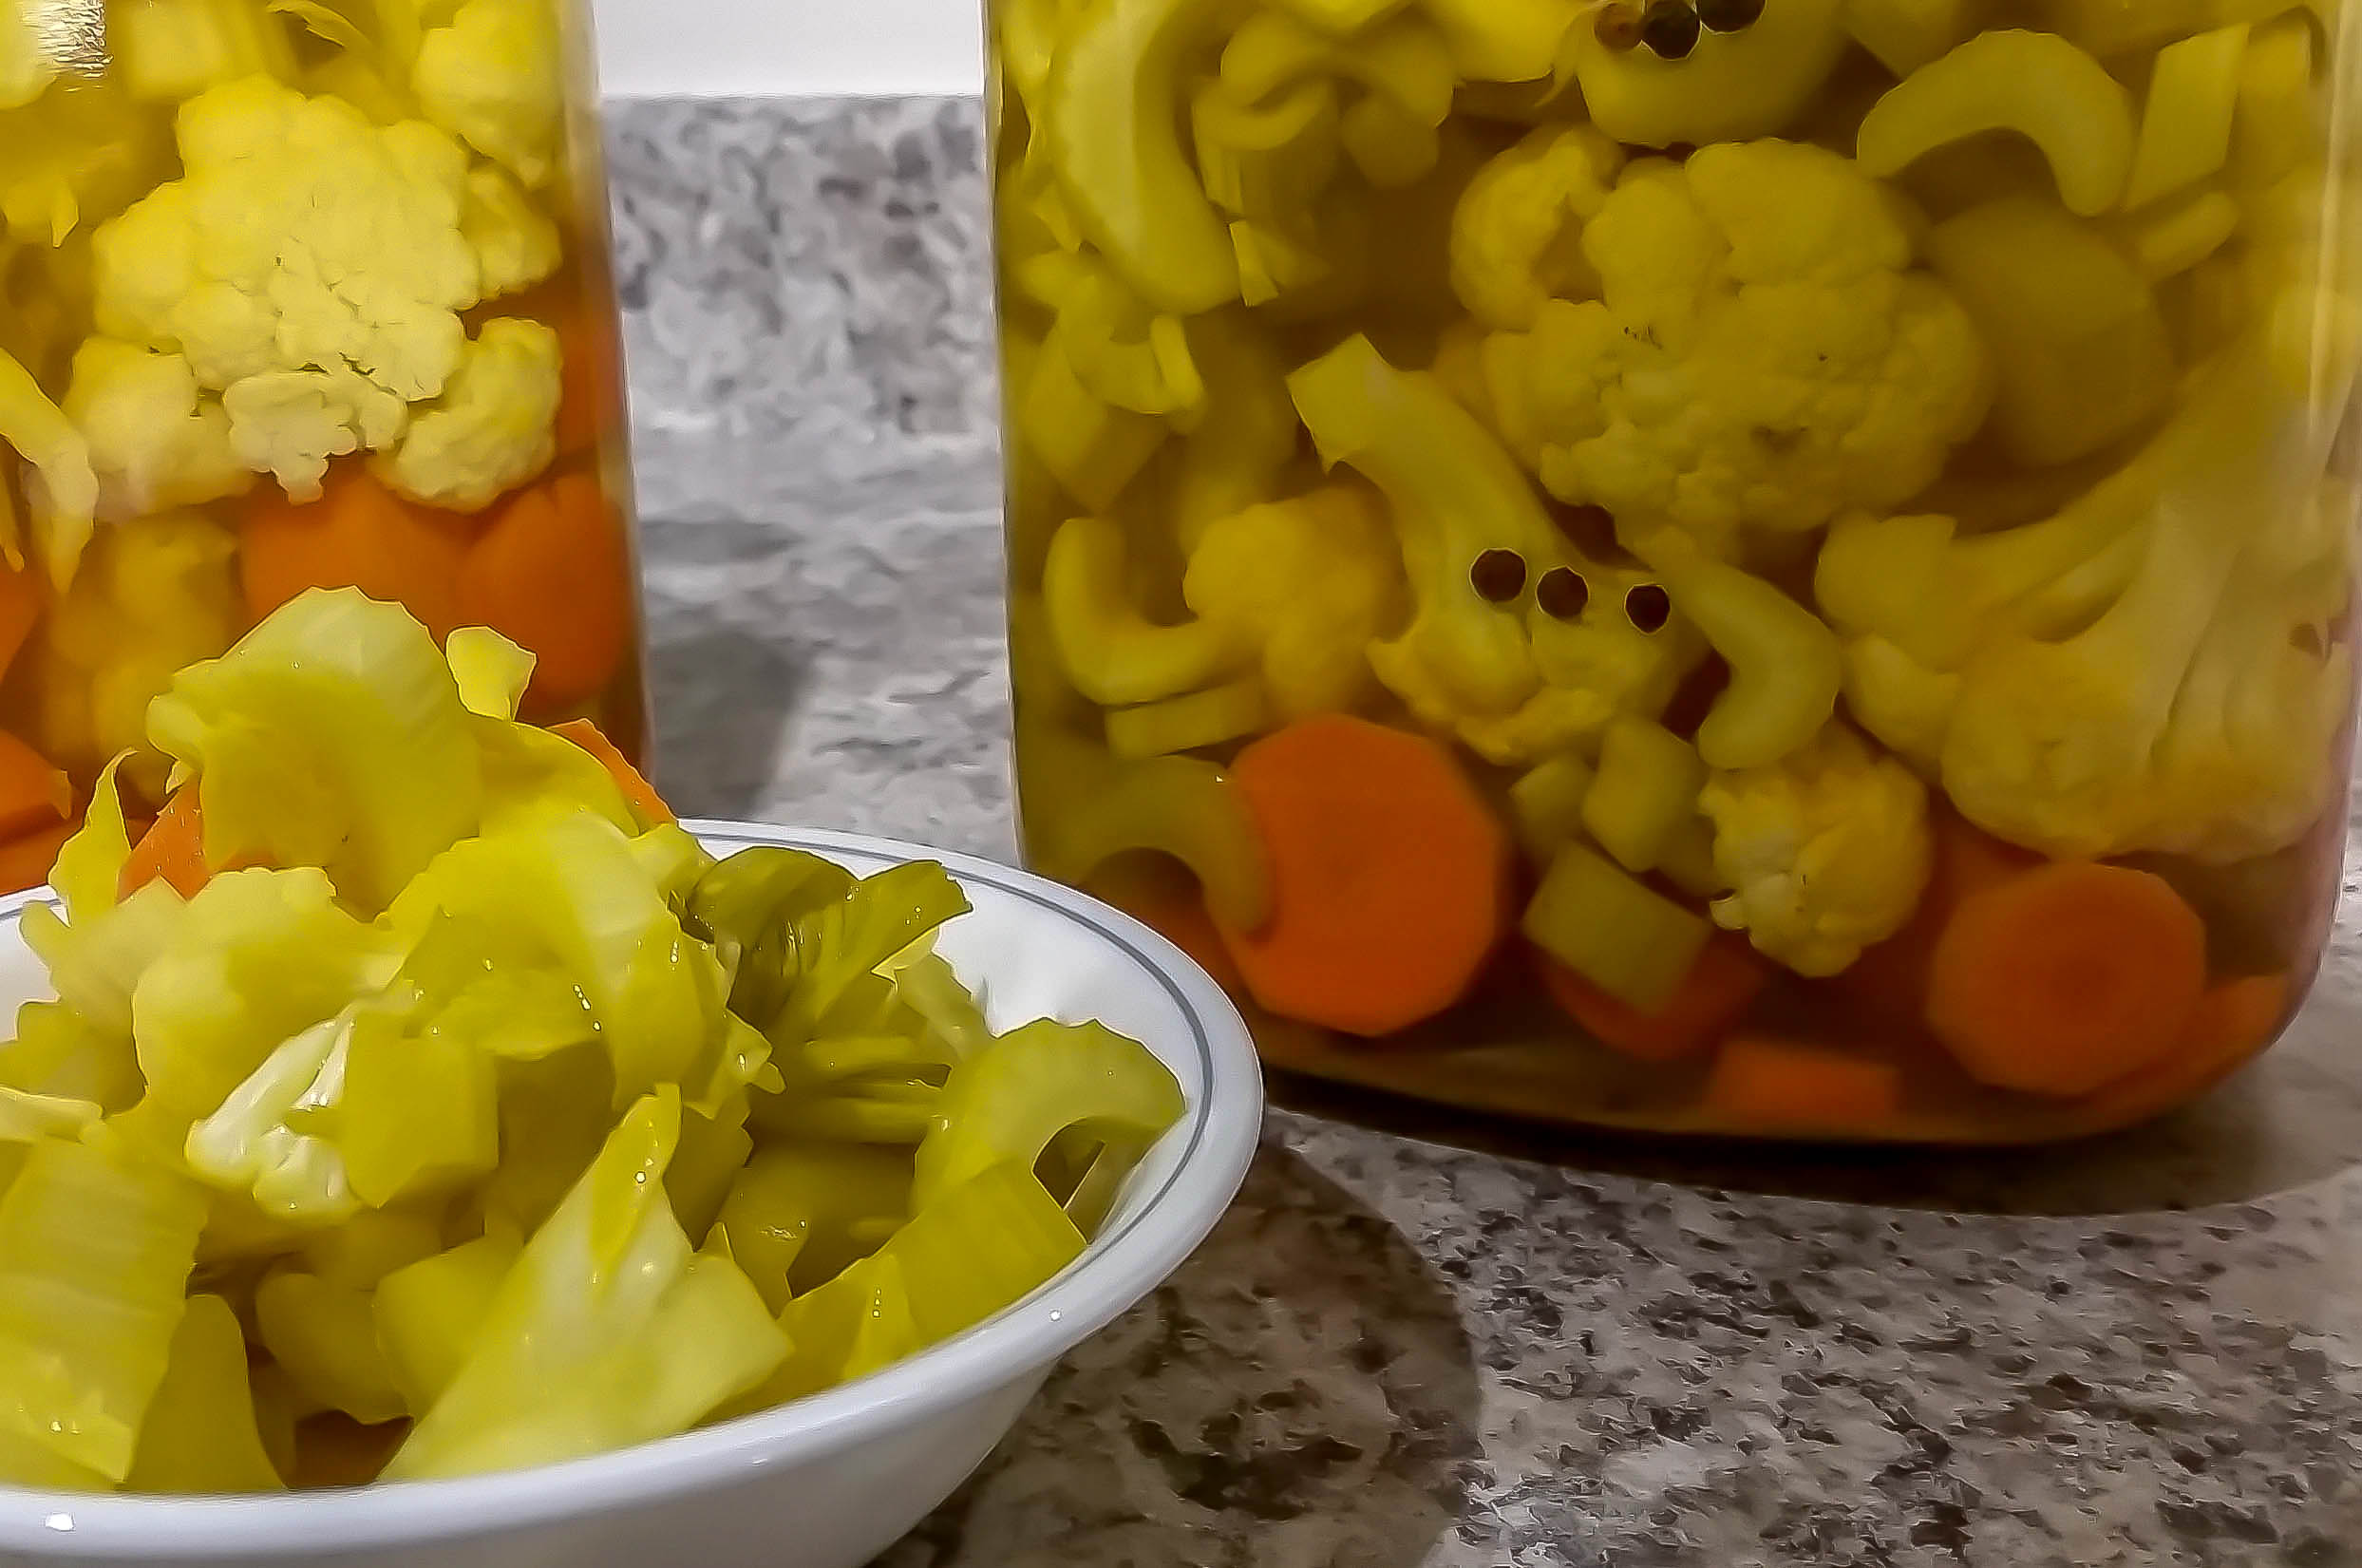 Turshi / Pickled Vegetables: Celery, Cauliflower, Carrots and Cabbage